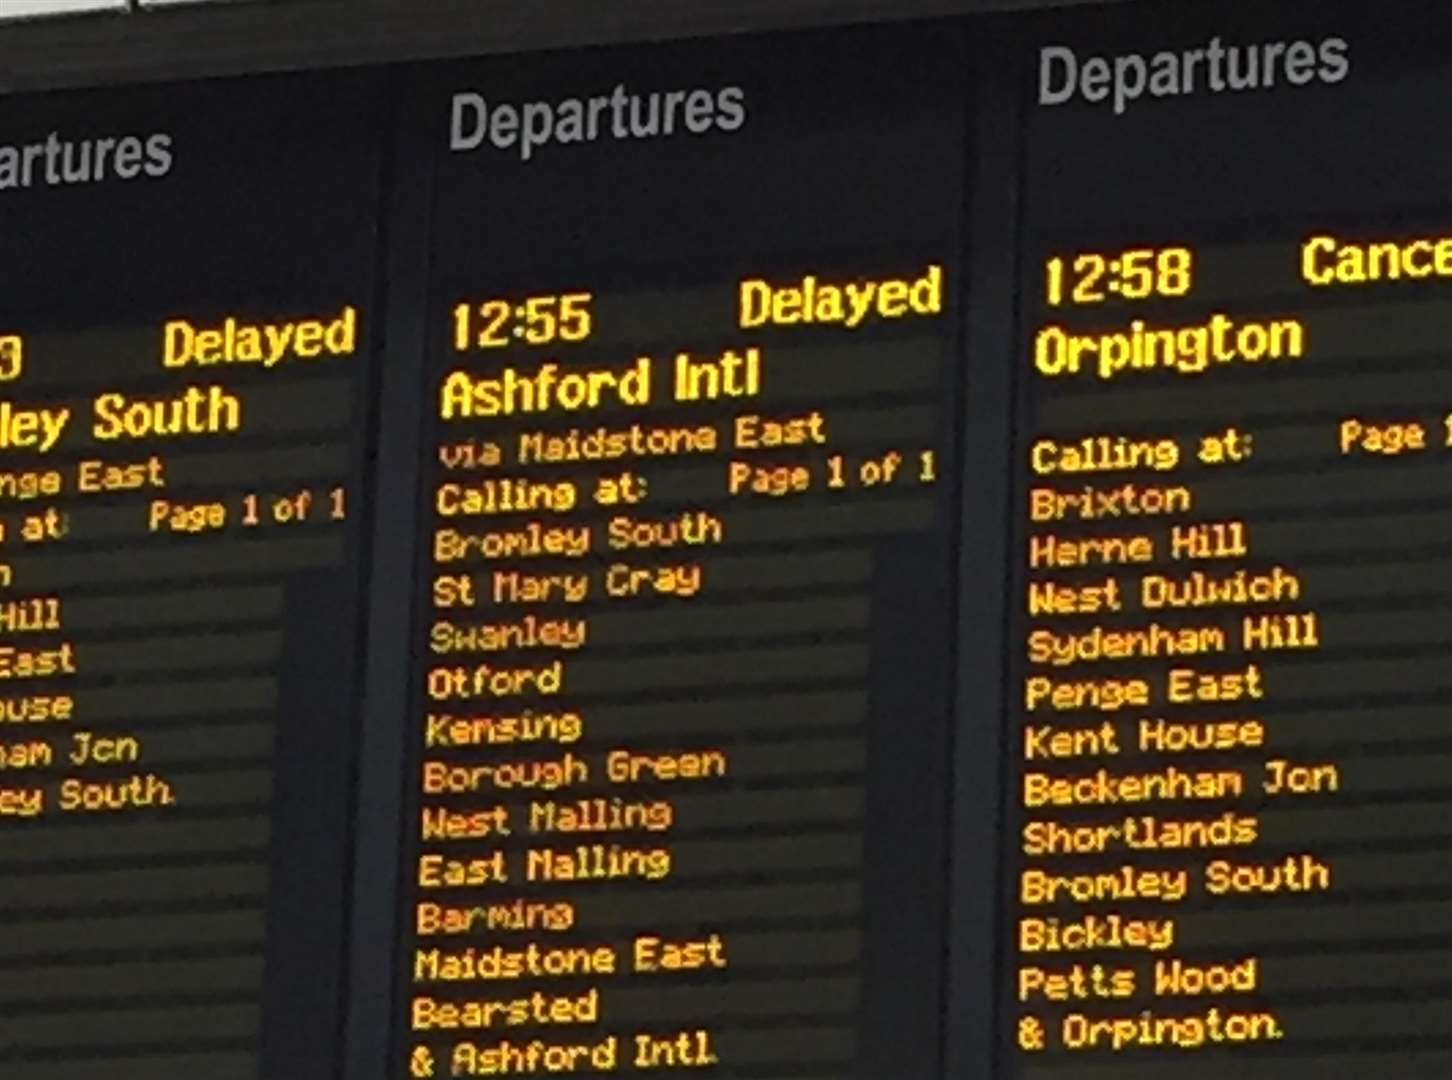 Services two and from Kent have stopped until 4pm